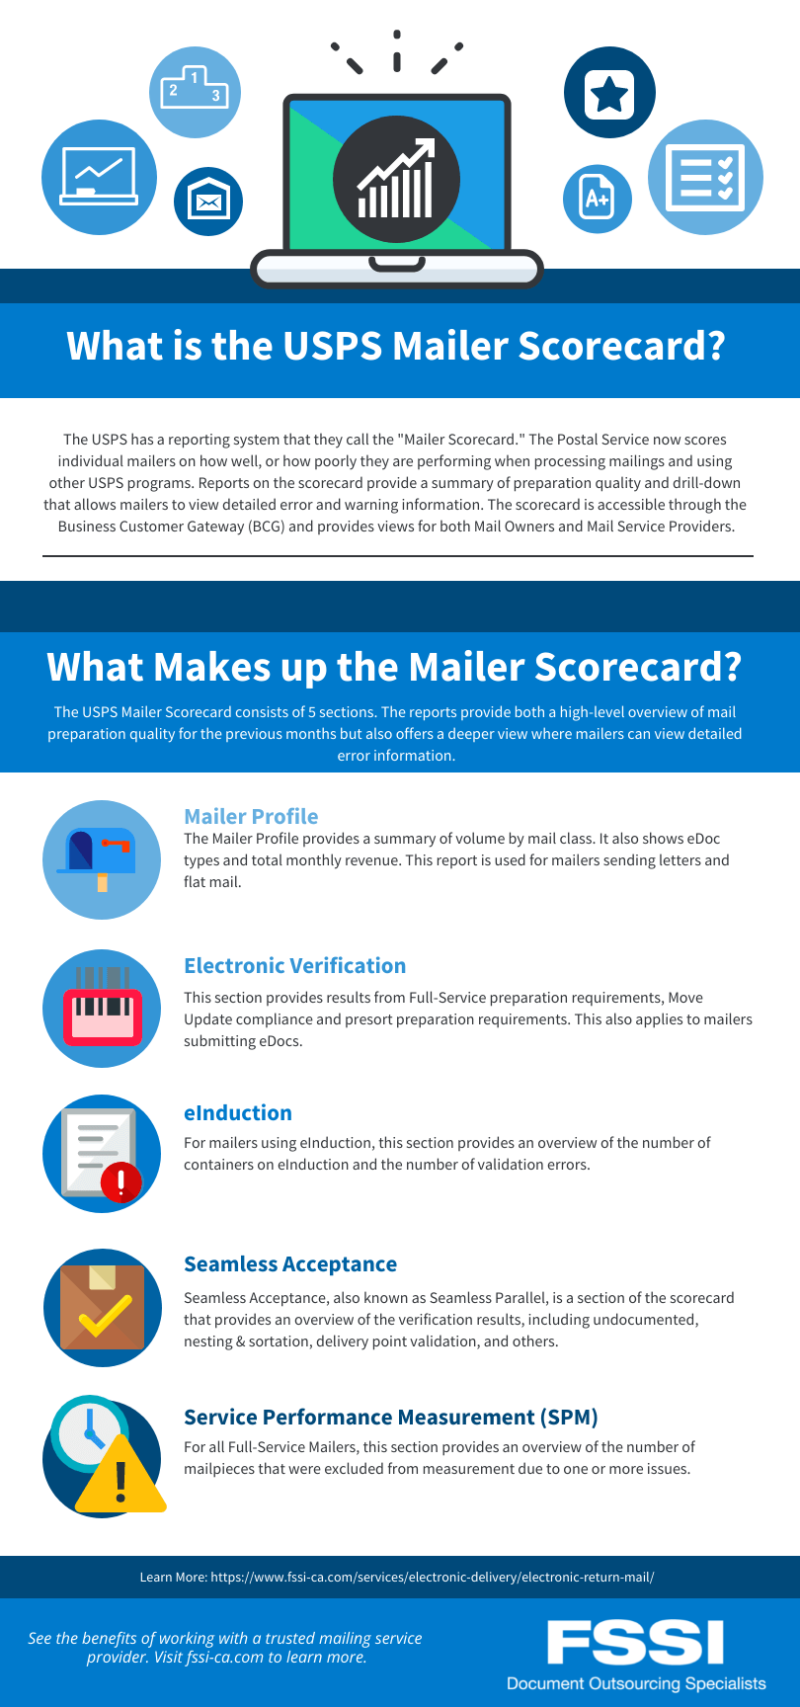 Guide to the USPS Mailer Scorecard Graphic